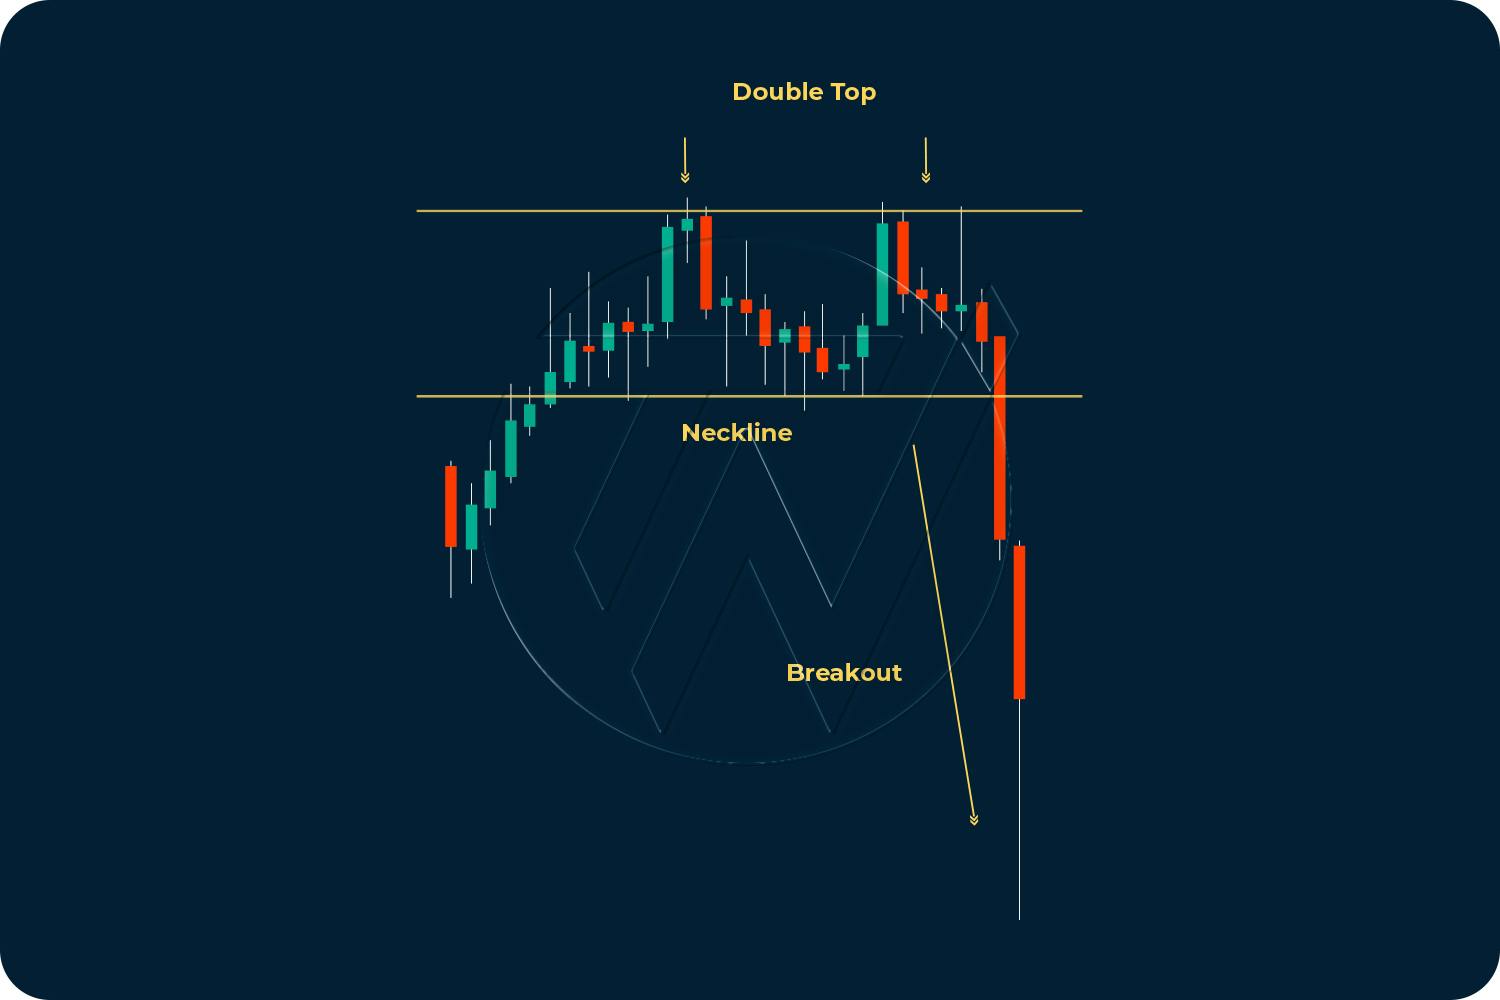 Candlestick chart patterns illustrating double top breakout